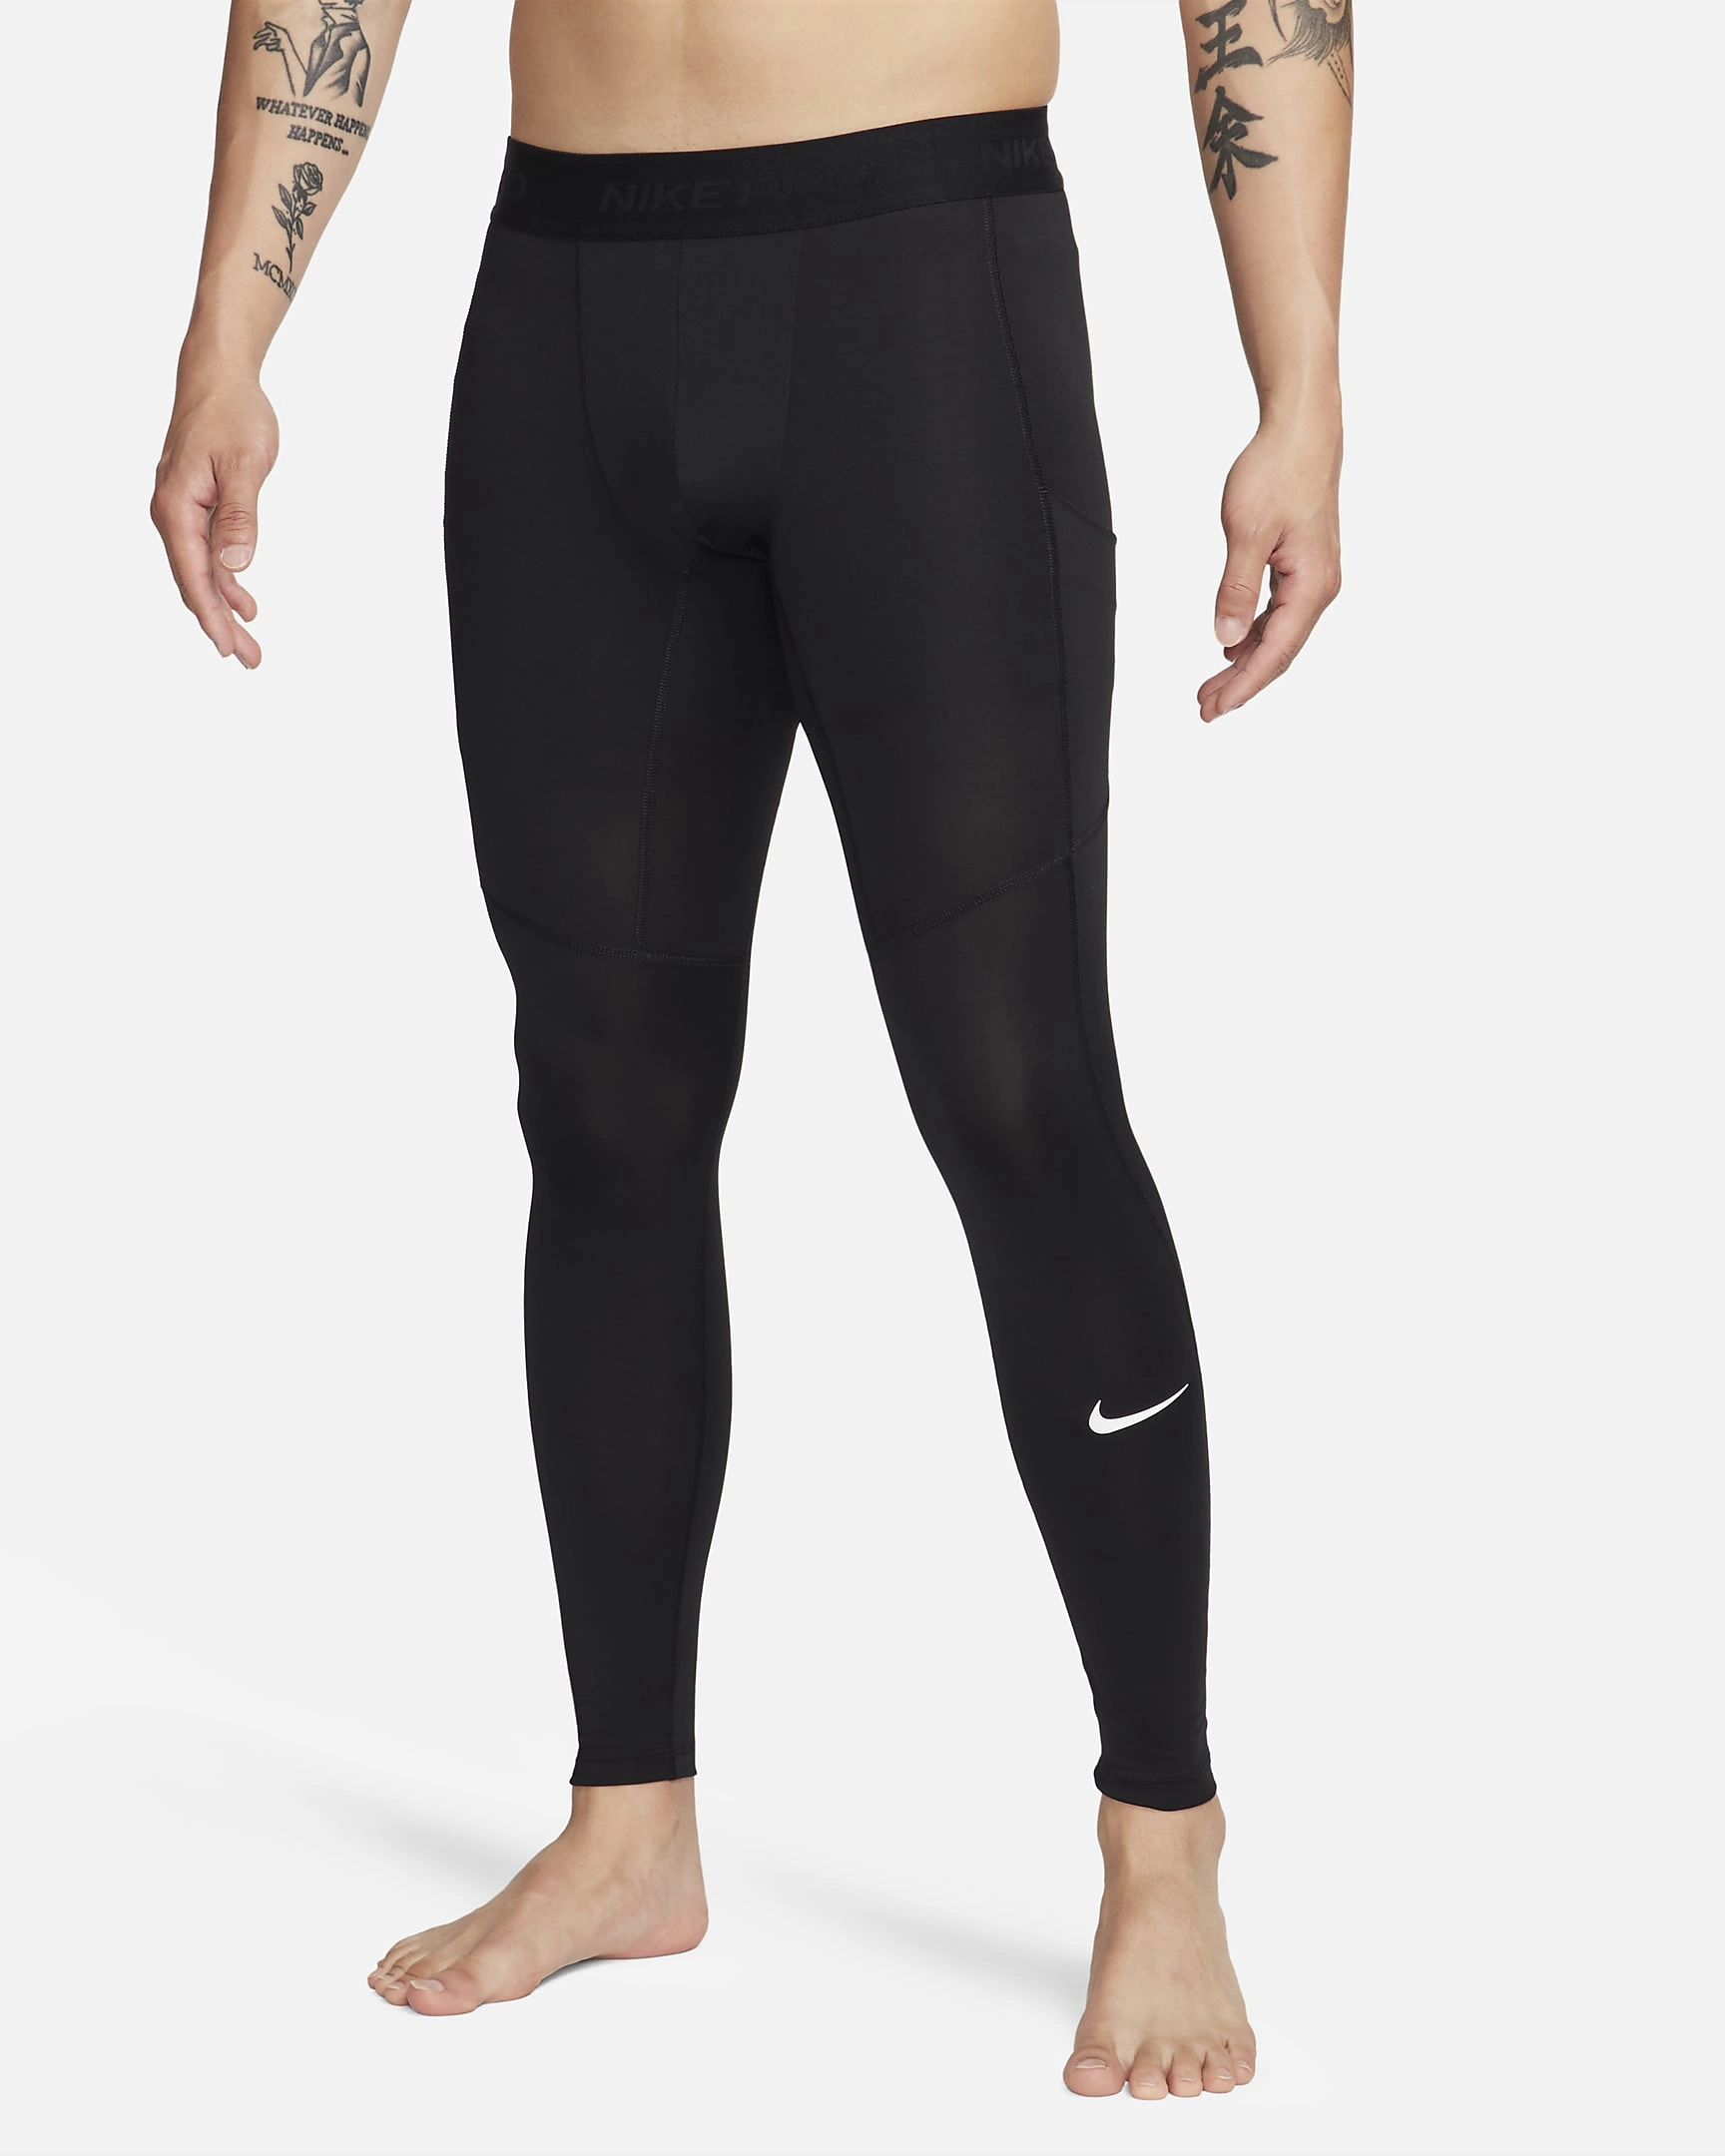 Nike Pro Men's Dri-FIT Fitness Tights - Compression Fit &amp; Support for Optimal Performance During Workouts-53871